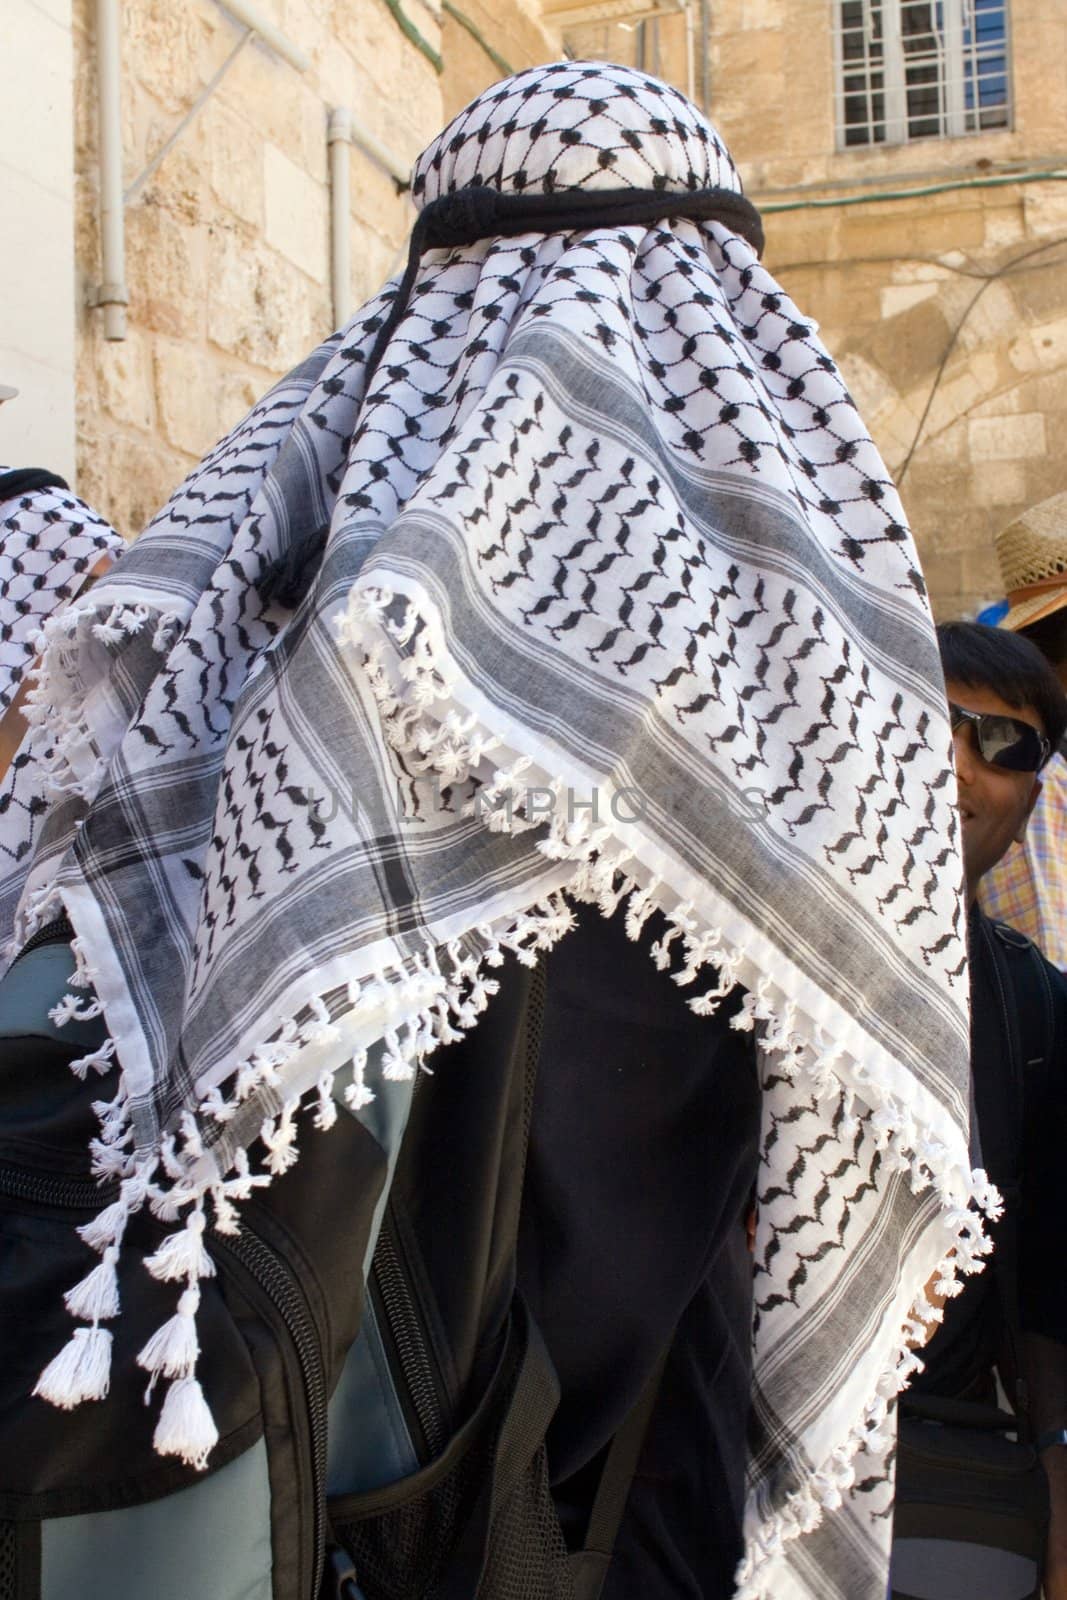 Palestinian man with traditional black and white keffiyeh in East Jerusalem